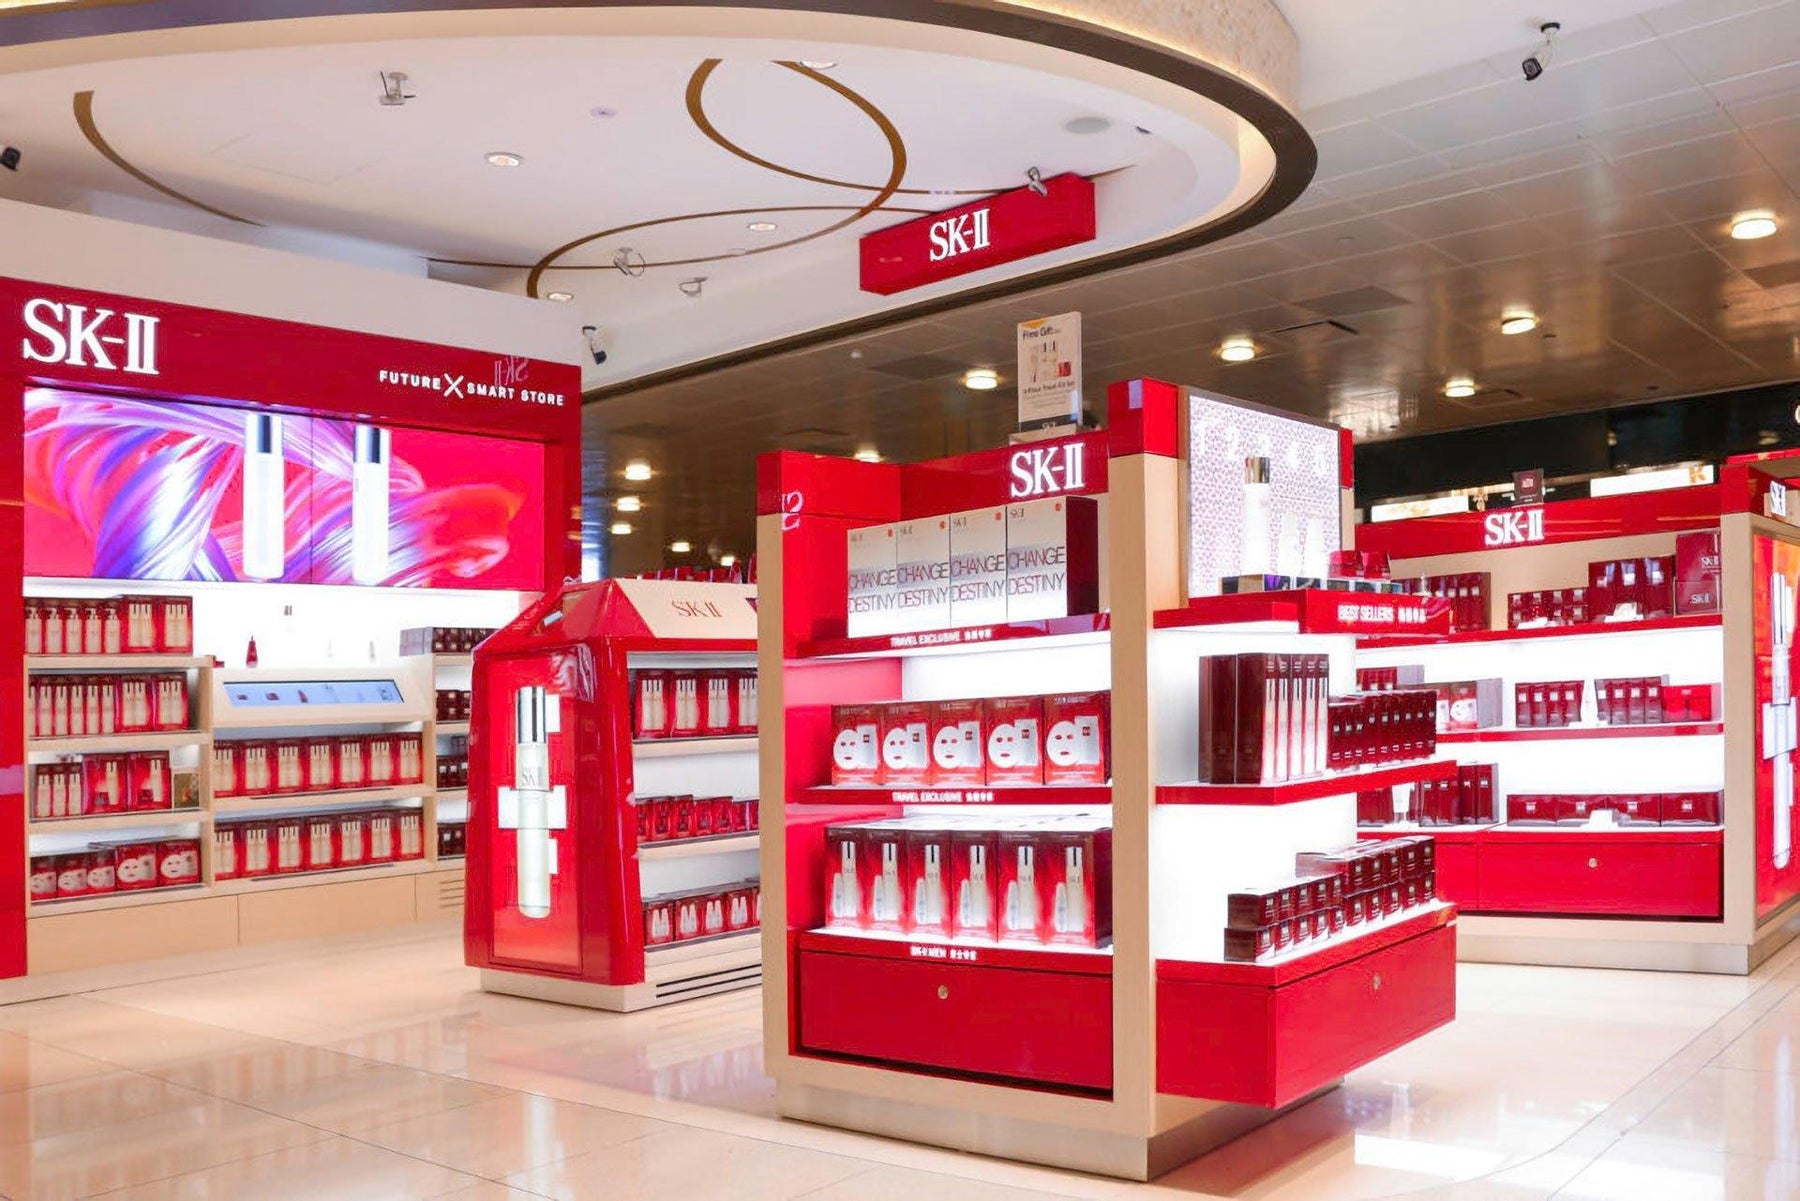 The future of beauty retail? SK-II Future X Smart store launches with The Shilla Duty Free at Changi - M2 Retail